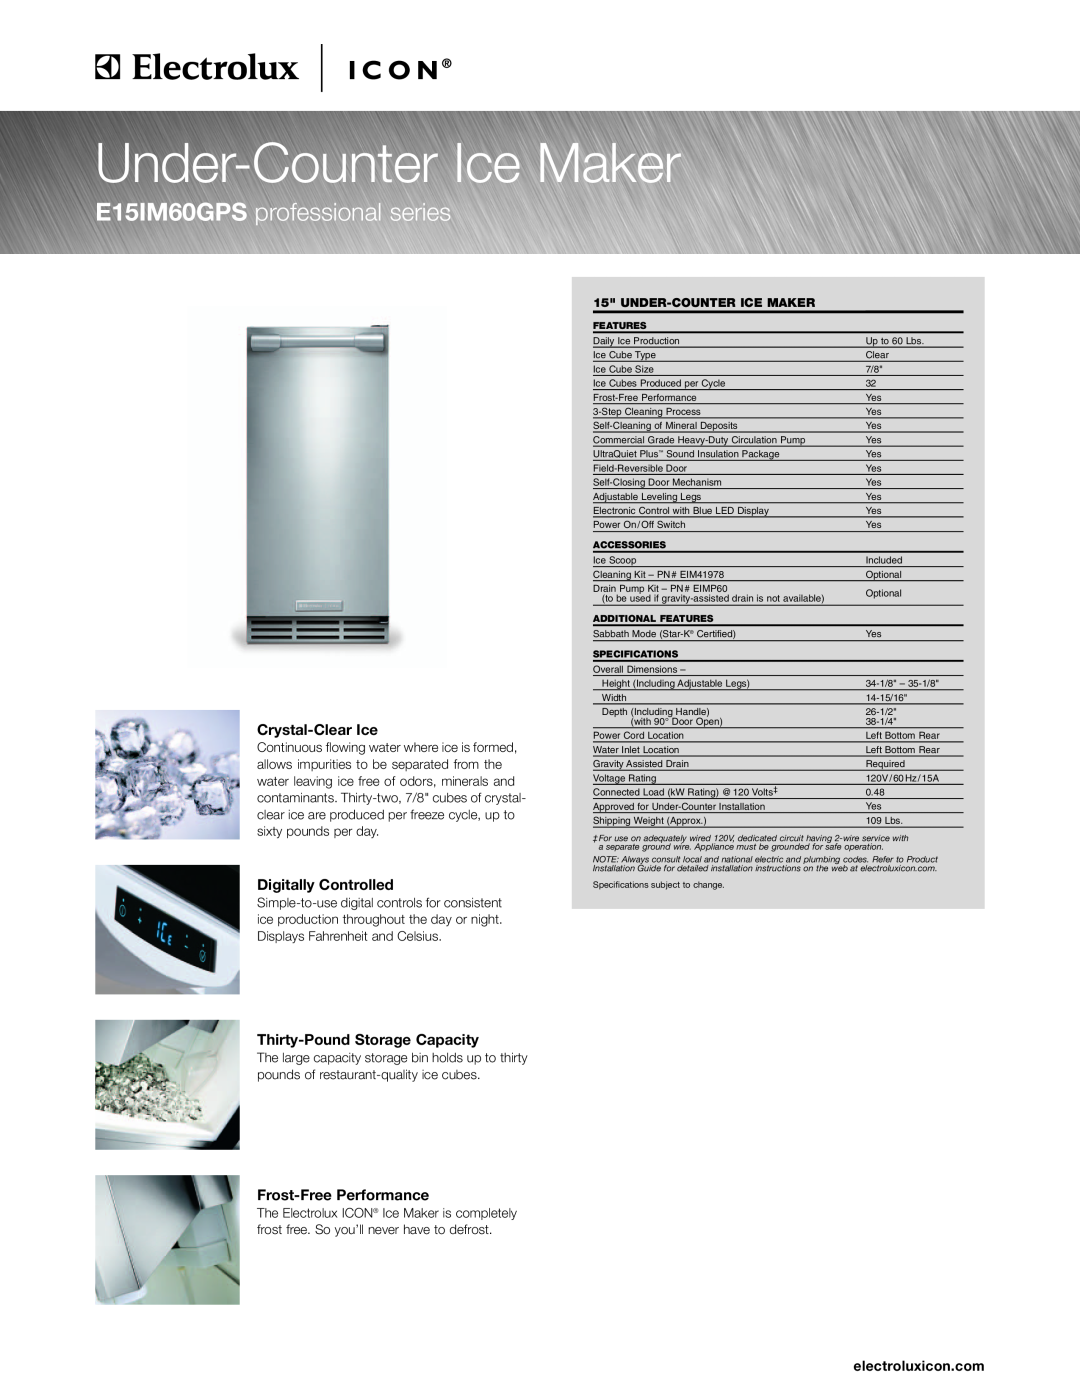 Electrolux E15IM60GPS specifications Crystal-Clear Ice, Digitally Controlled, Thirty-Pound Storage Capacity 